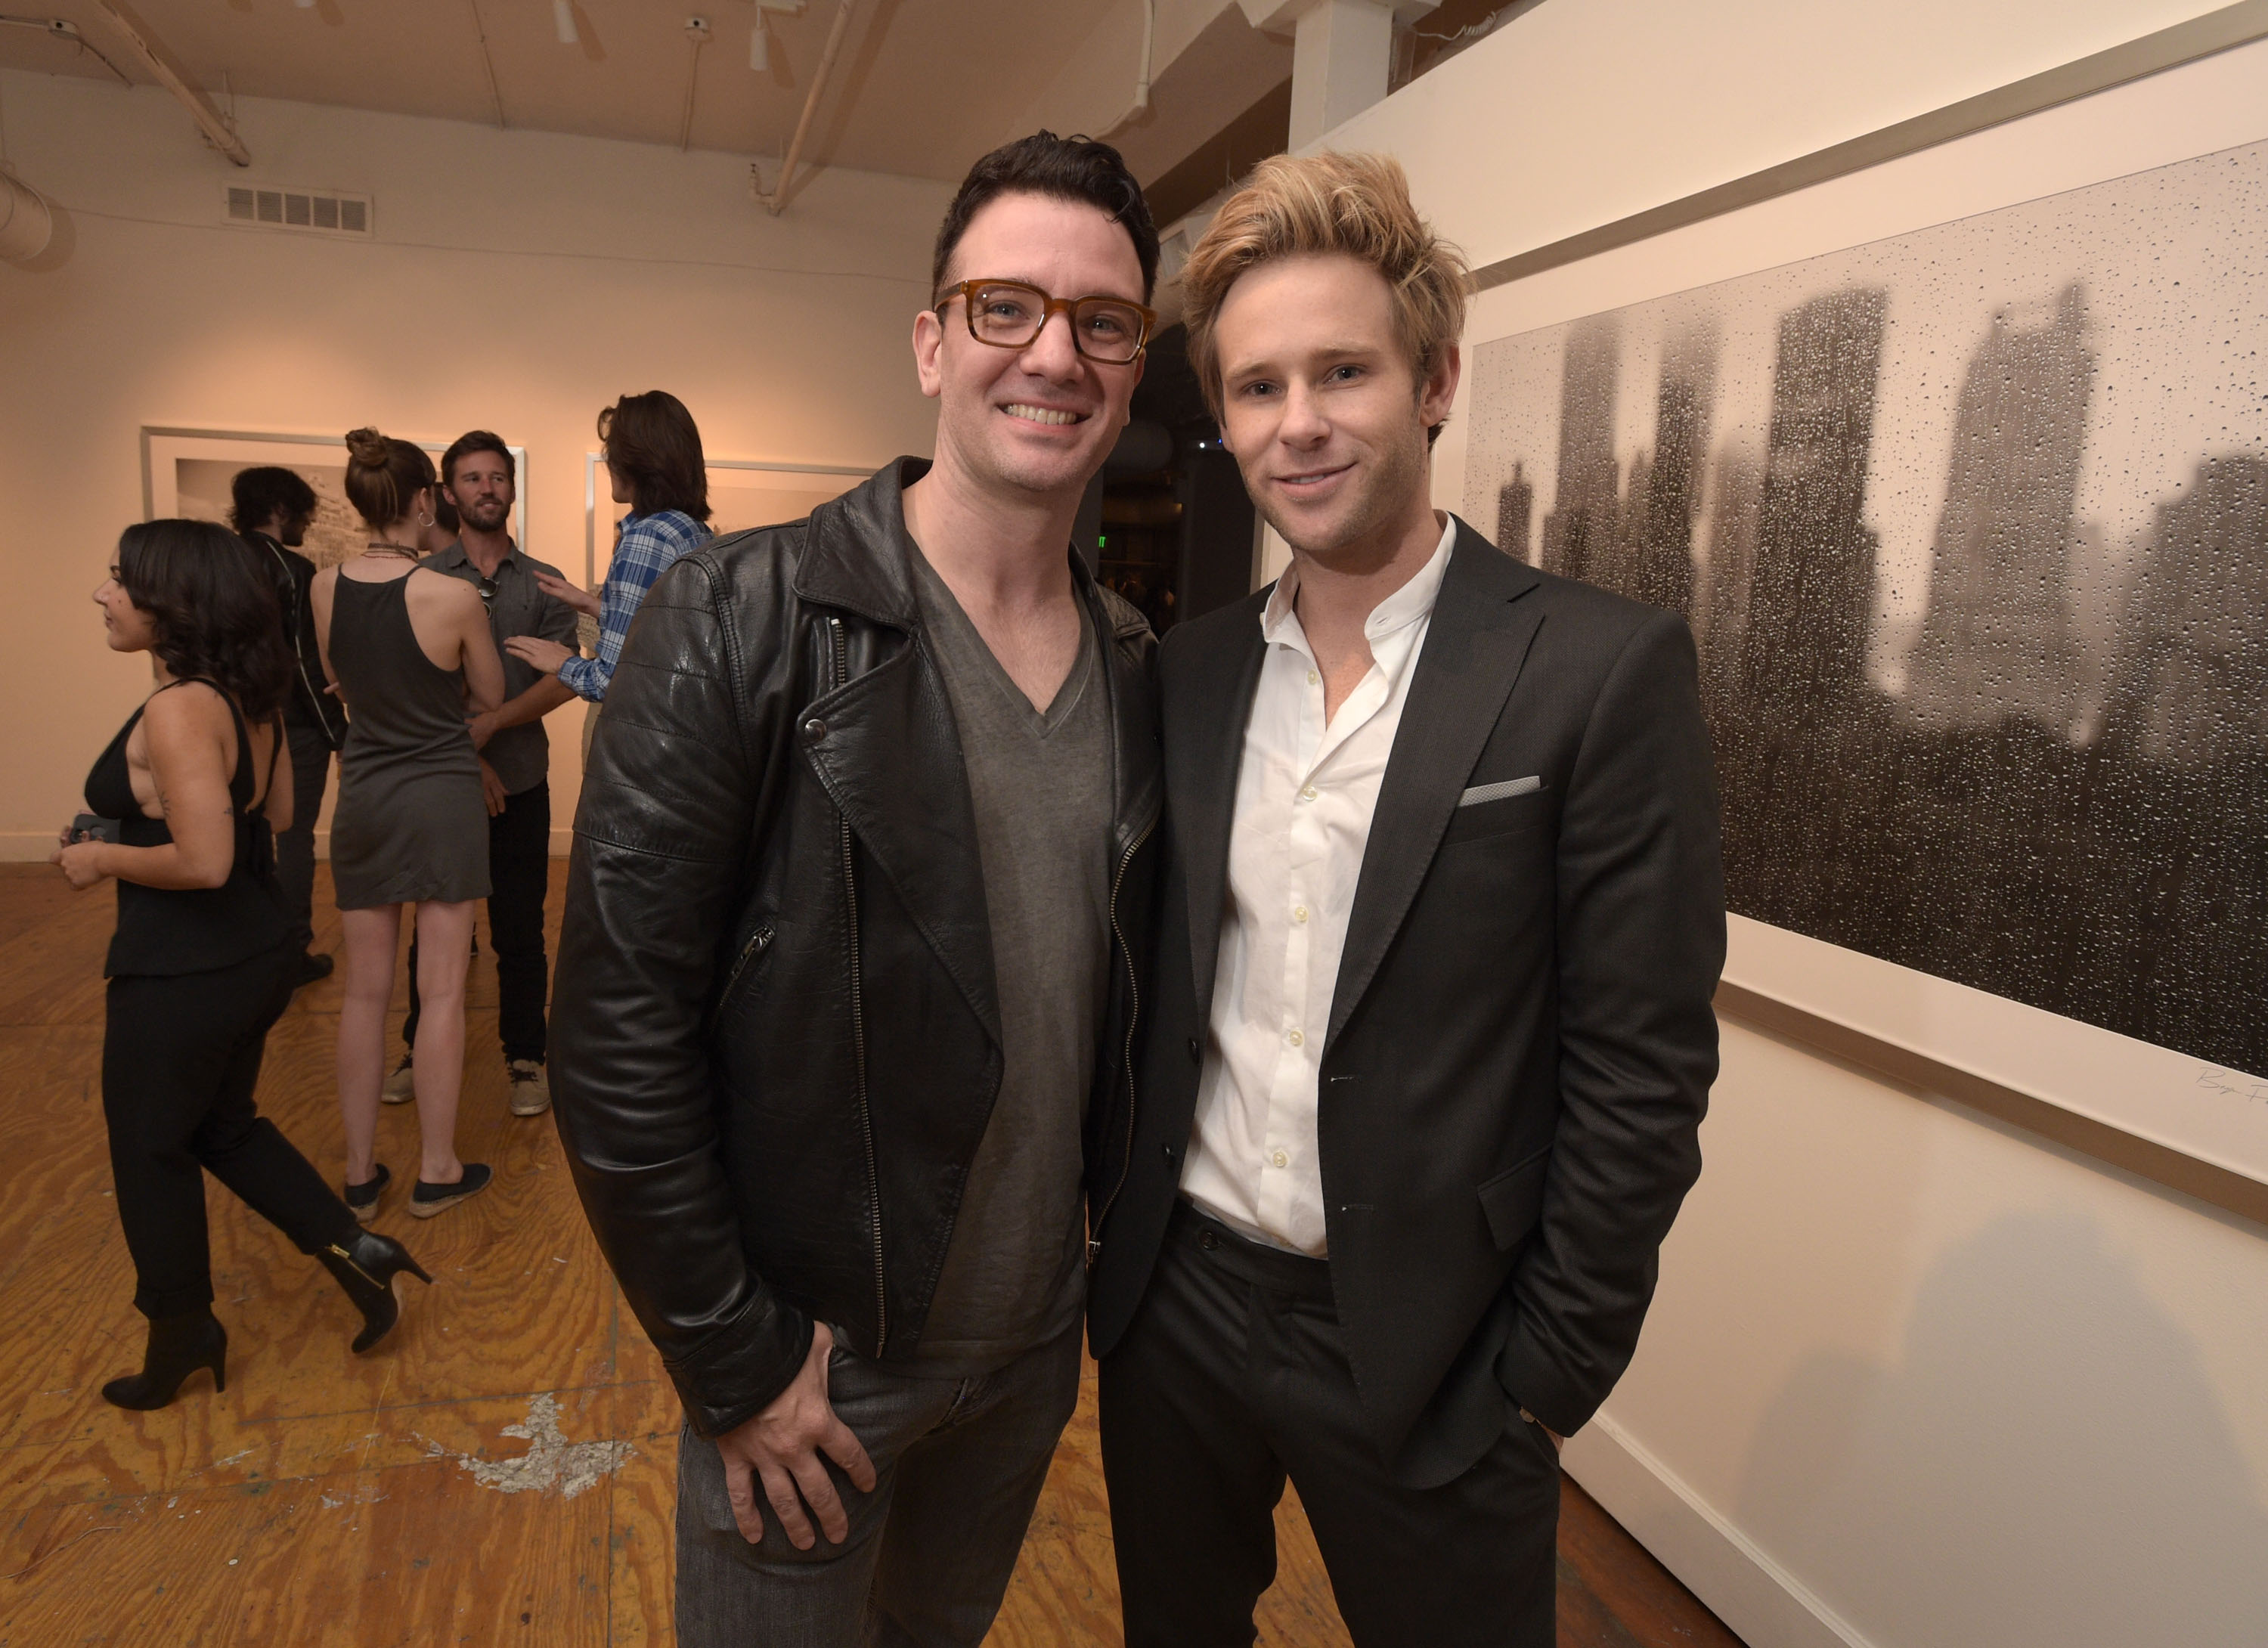 LOS ANGELES, CA - MAY 09: Actor JC Chasez (L) and artist Bryan Fox attend We. Alone. a photography exhibit by Bryan Fox at Think Tank Gallery on May 9, 2015 in Los Angeles, California.